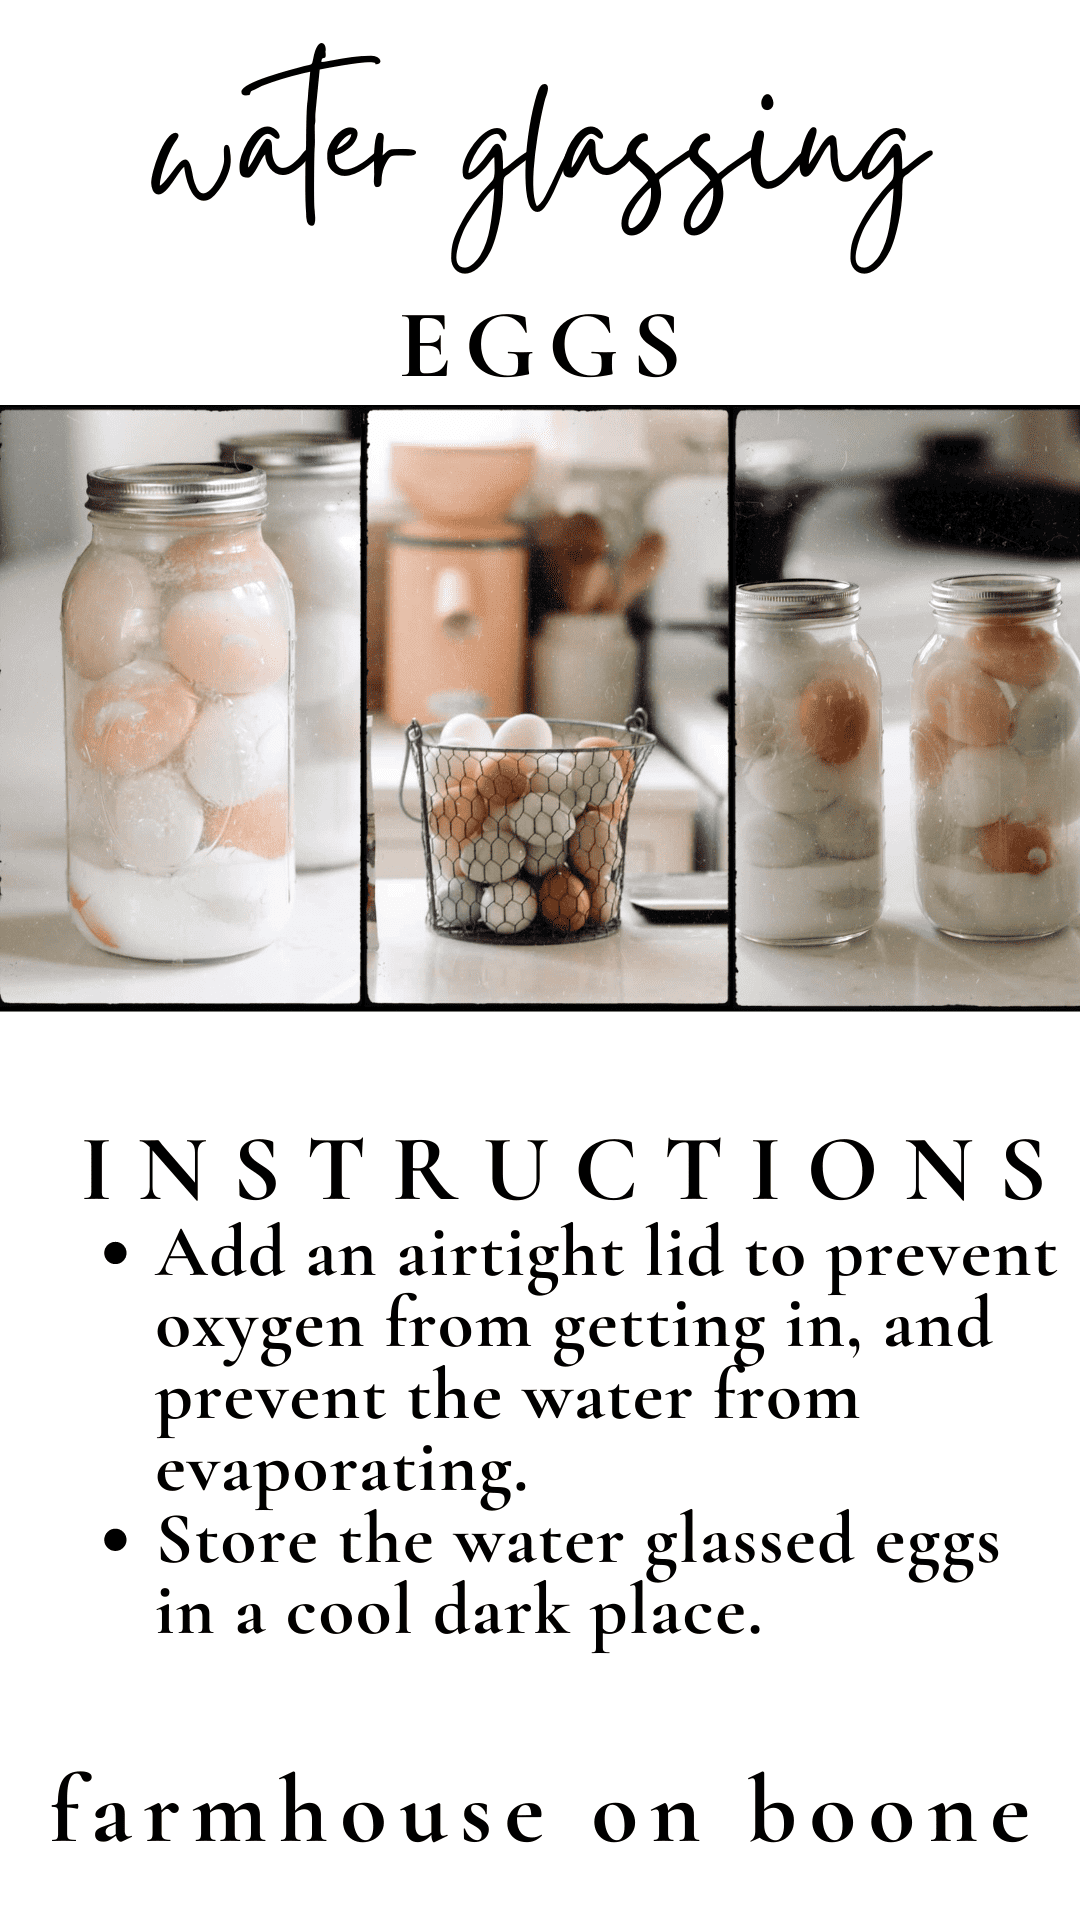 Water Glassing Eggs - Farmhouse on Boone